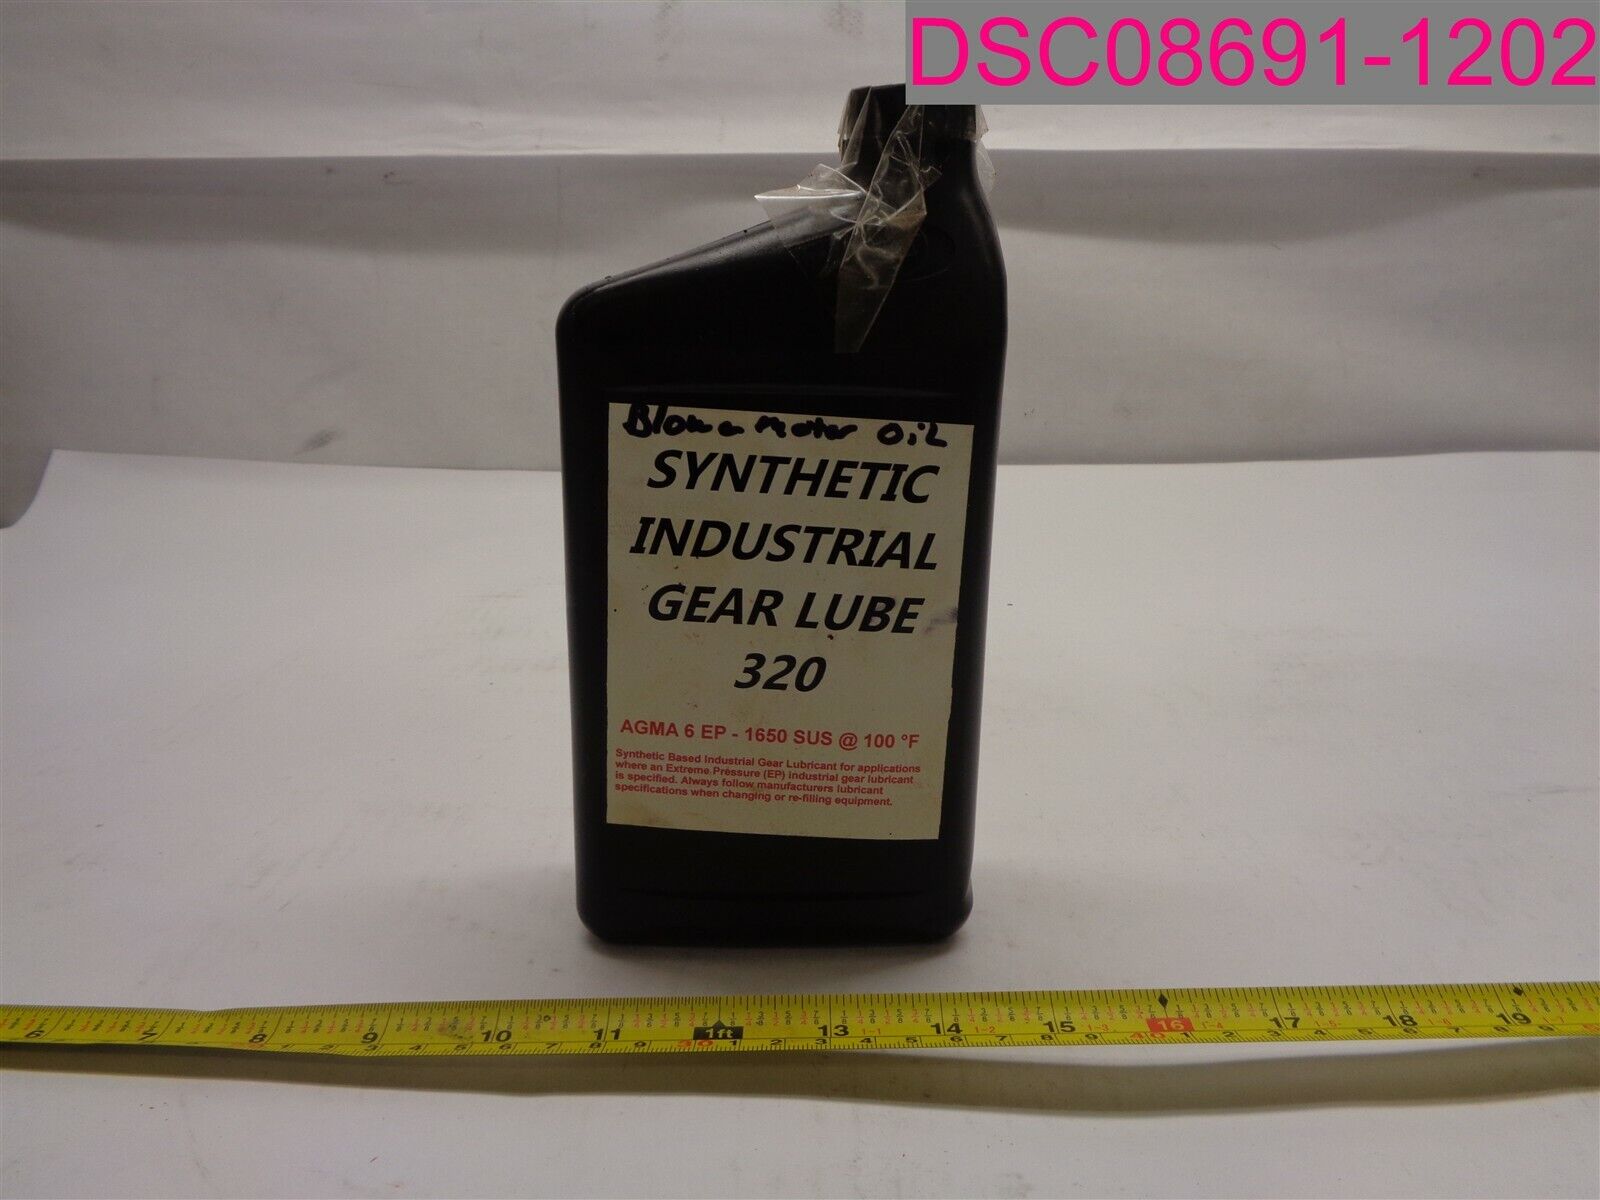 1 Qt. Synthetic Industrial Gear Lube 320, 041219005